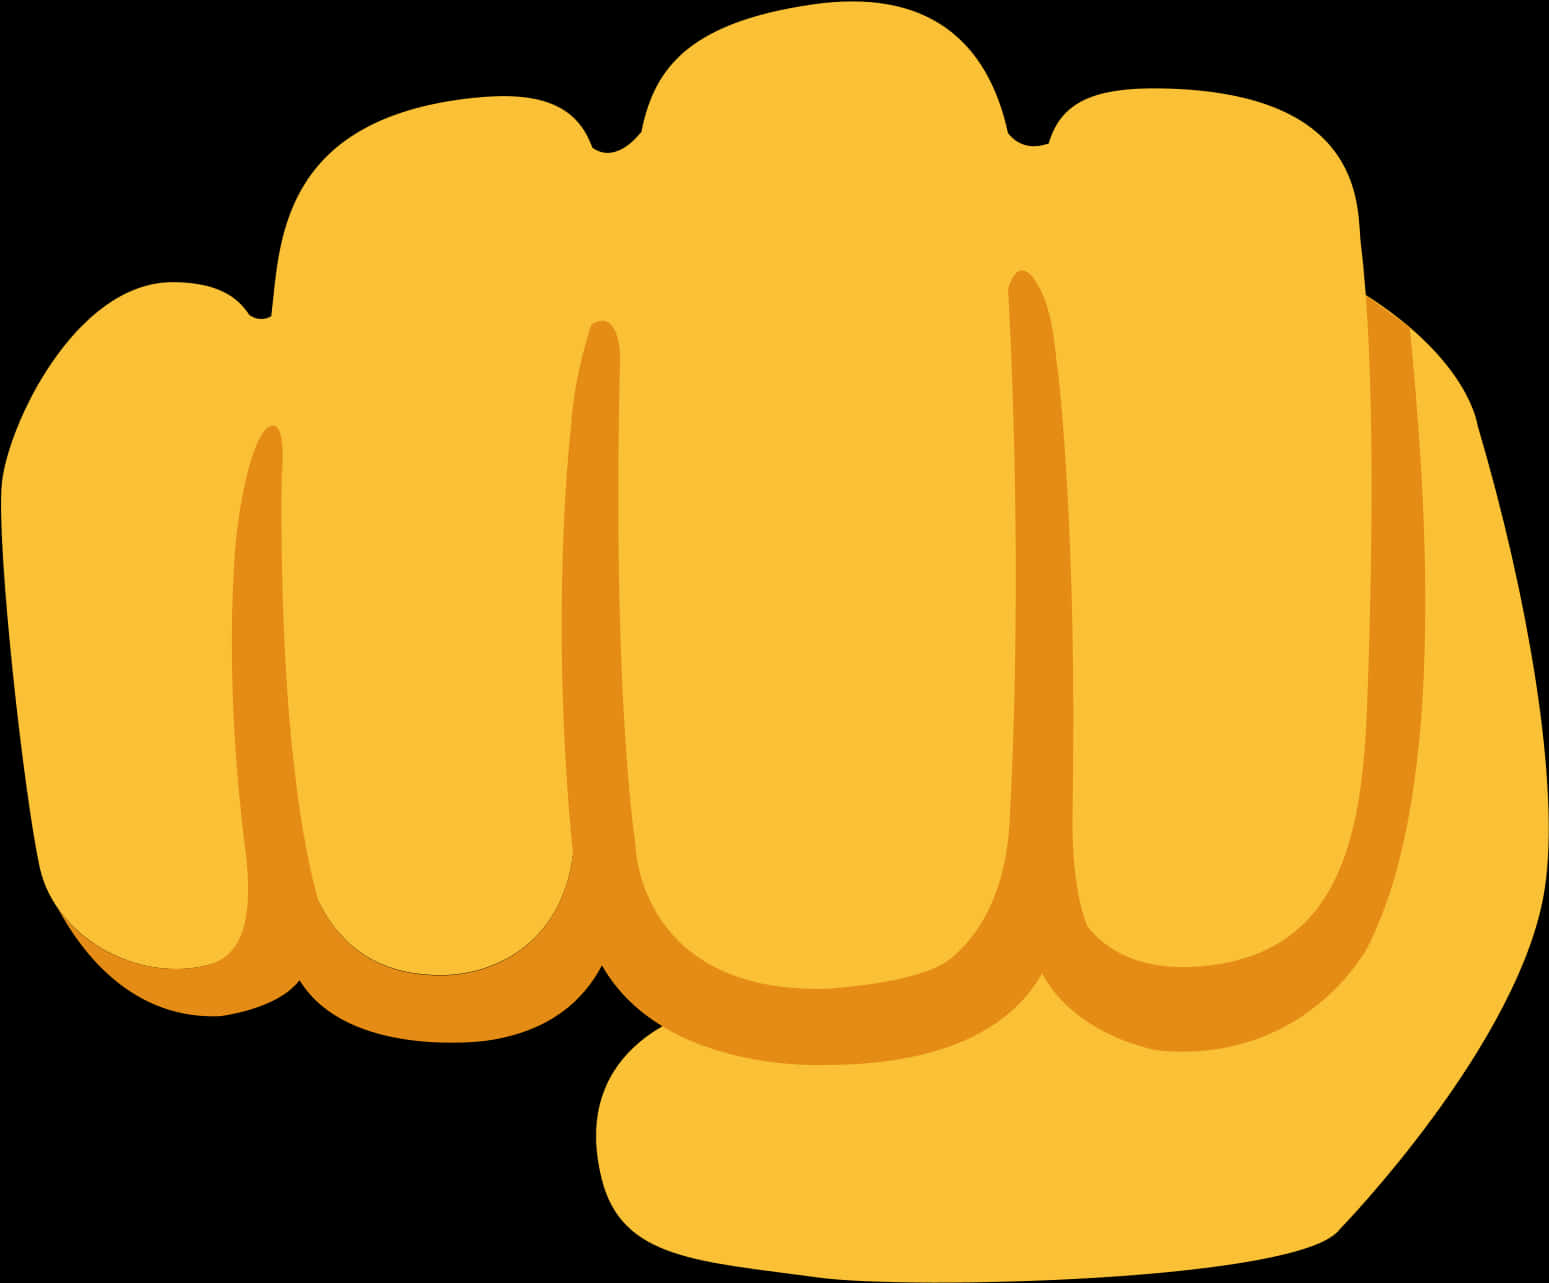 Golden Clenched Fist Illustration PNG